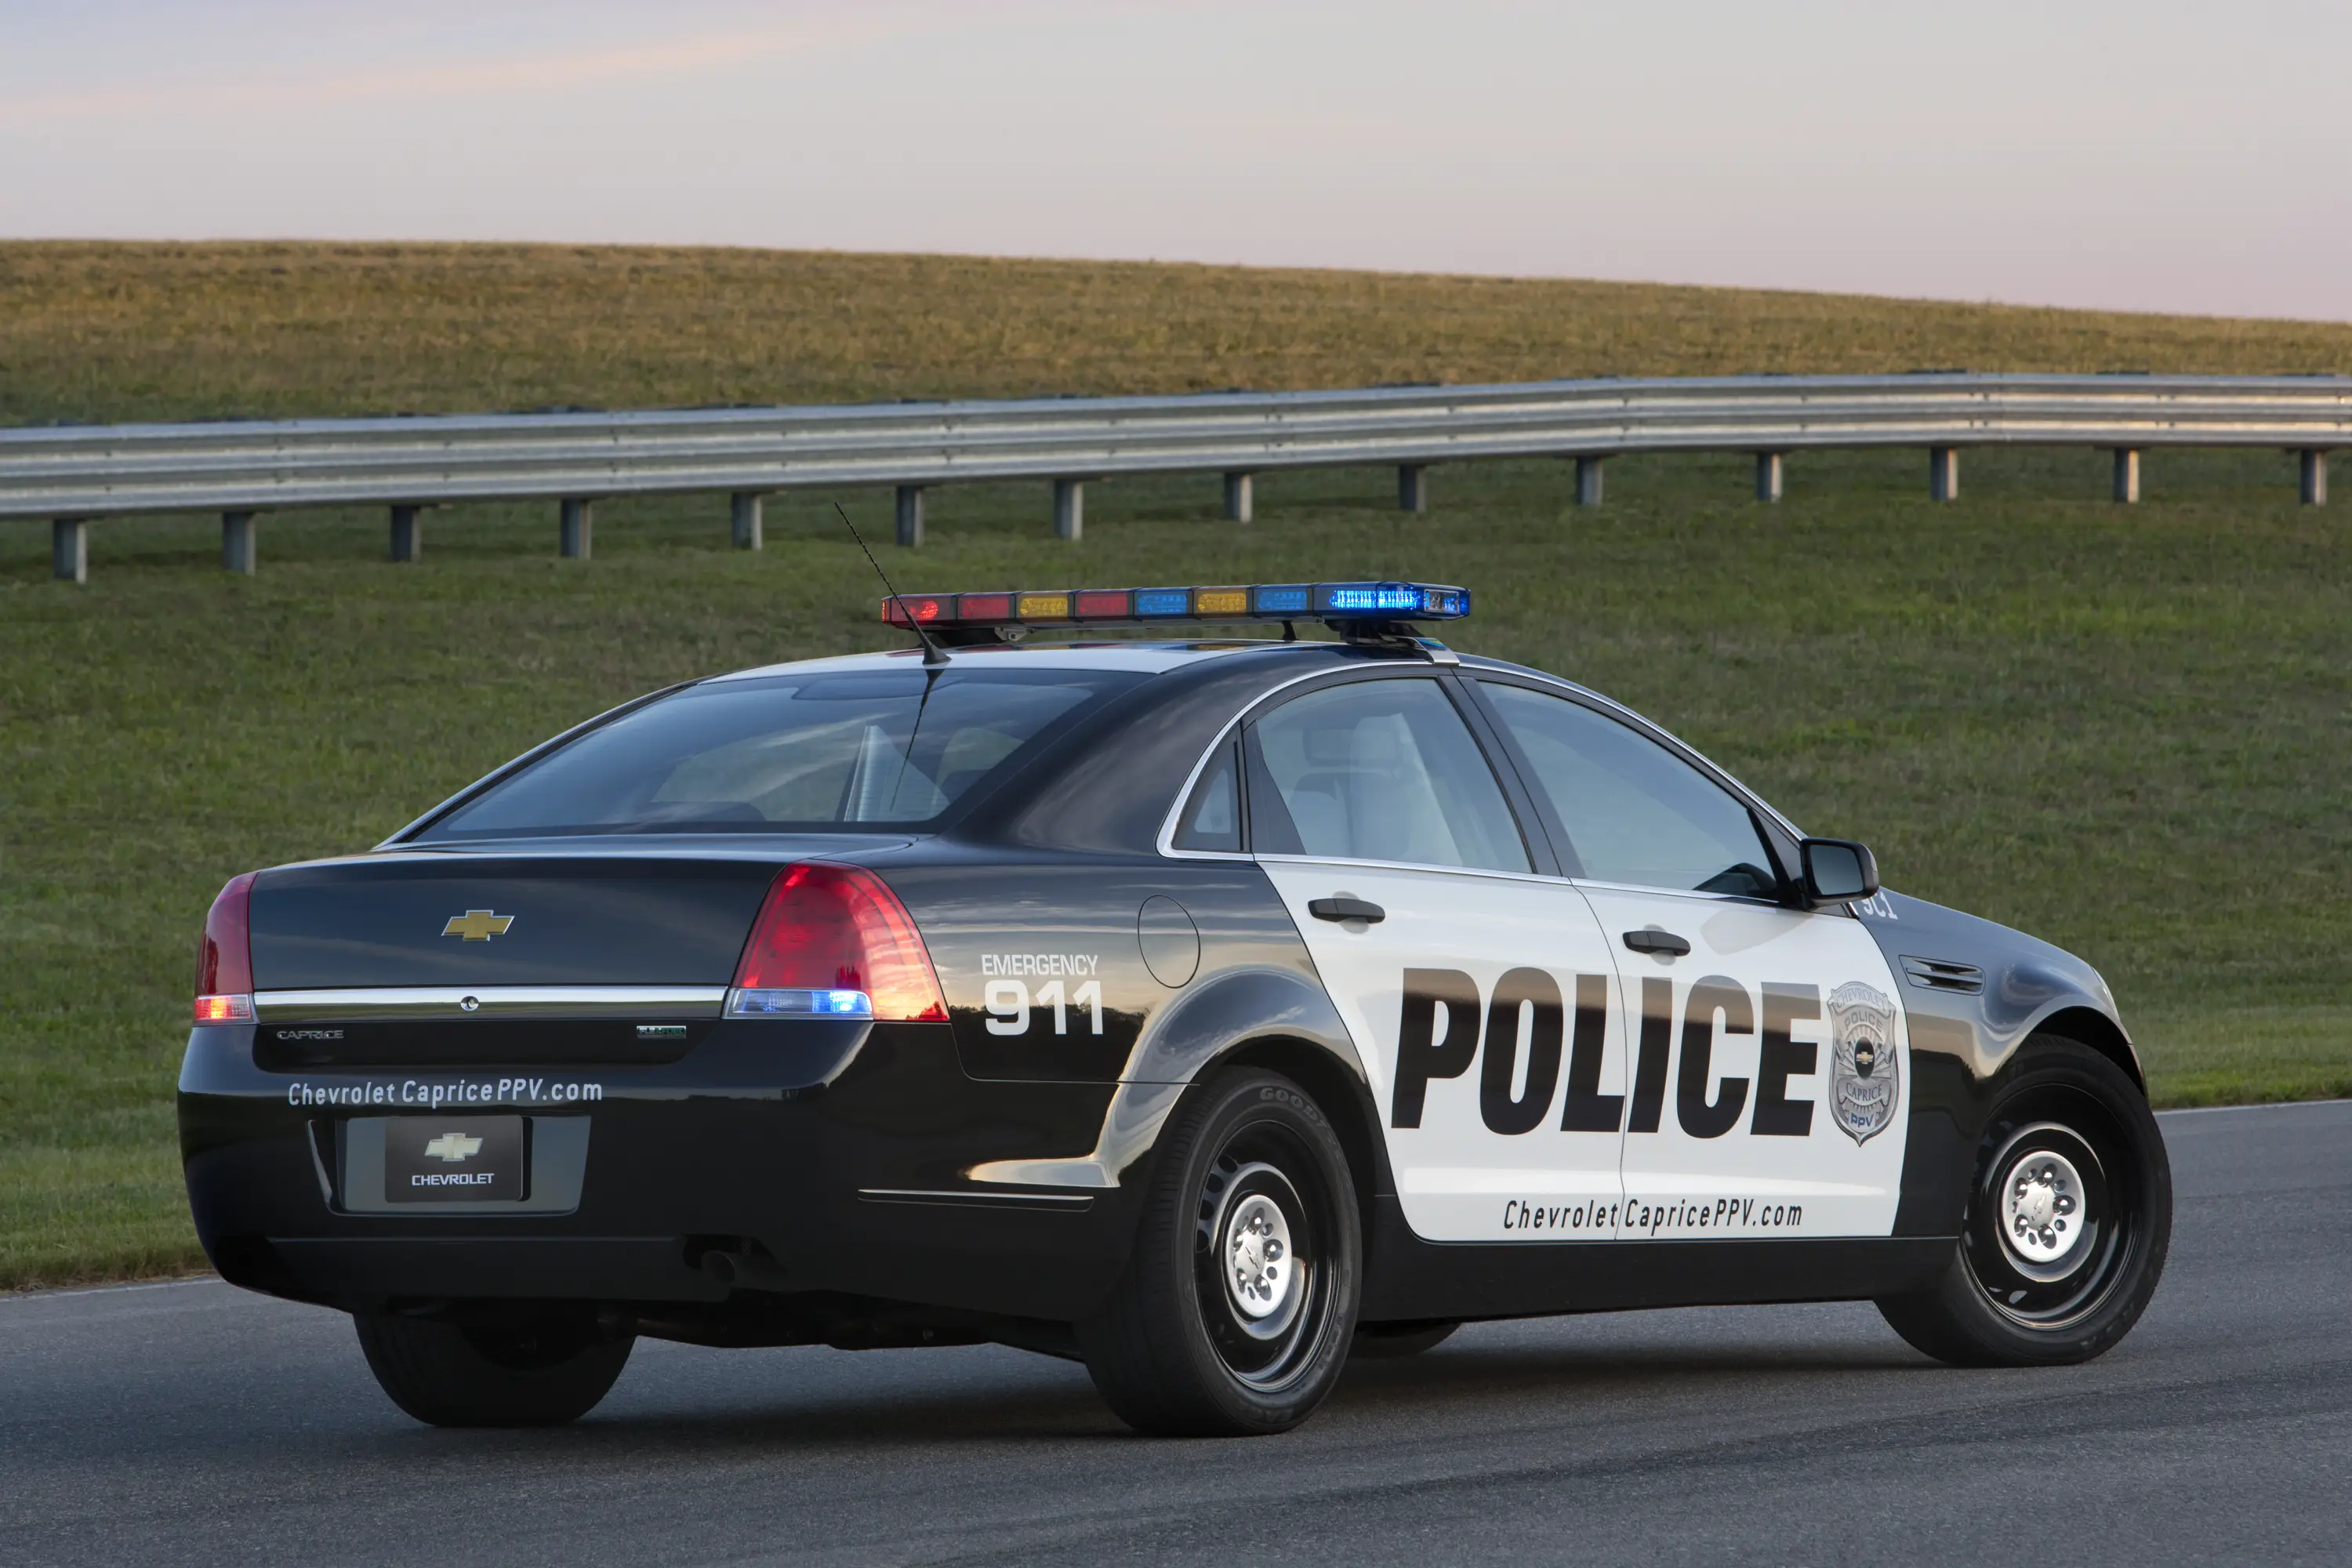 Chevrolet Caprice Police Patrol Vehicle Out to Arrest Competition This  Weekend, | Pontiac G8 Forum